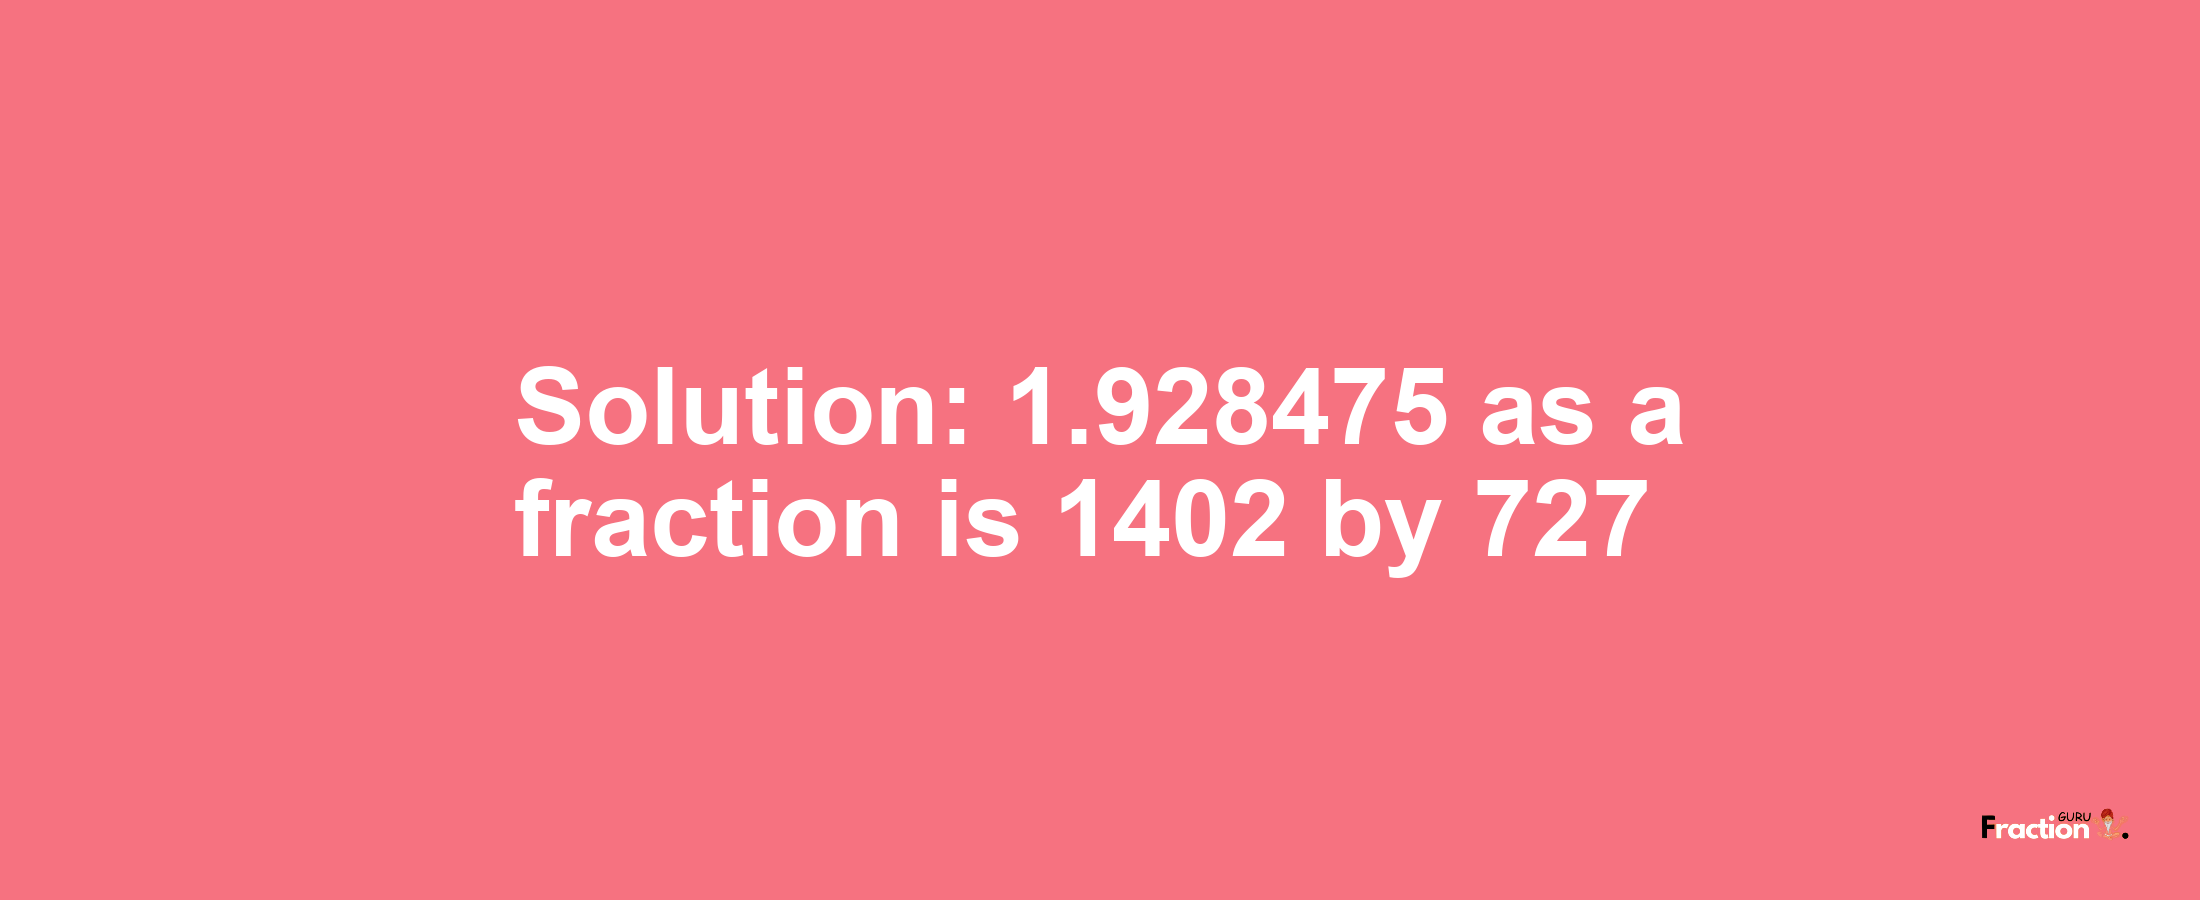 Solution:1.928475 as a fraction is 1402/727